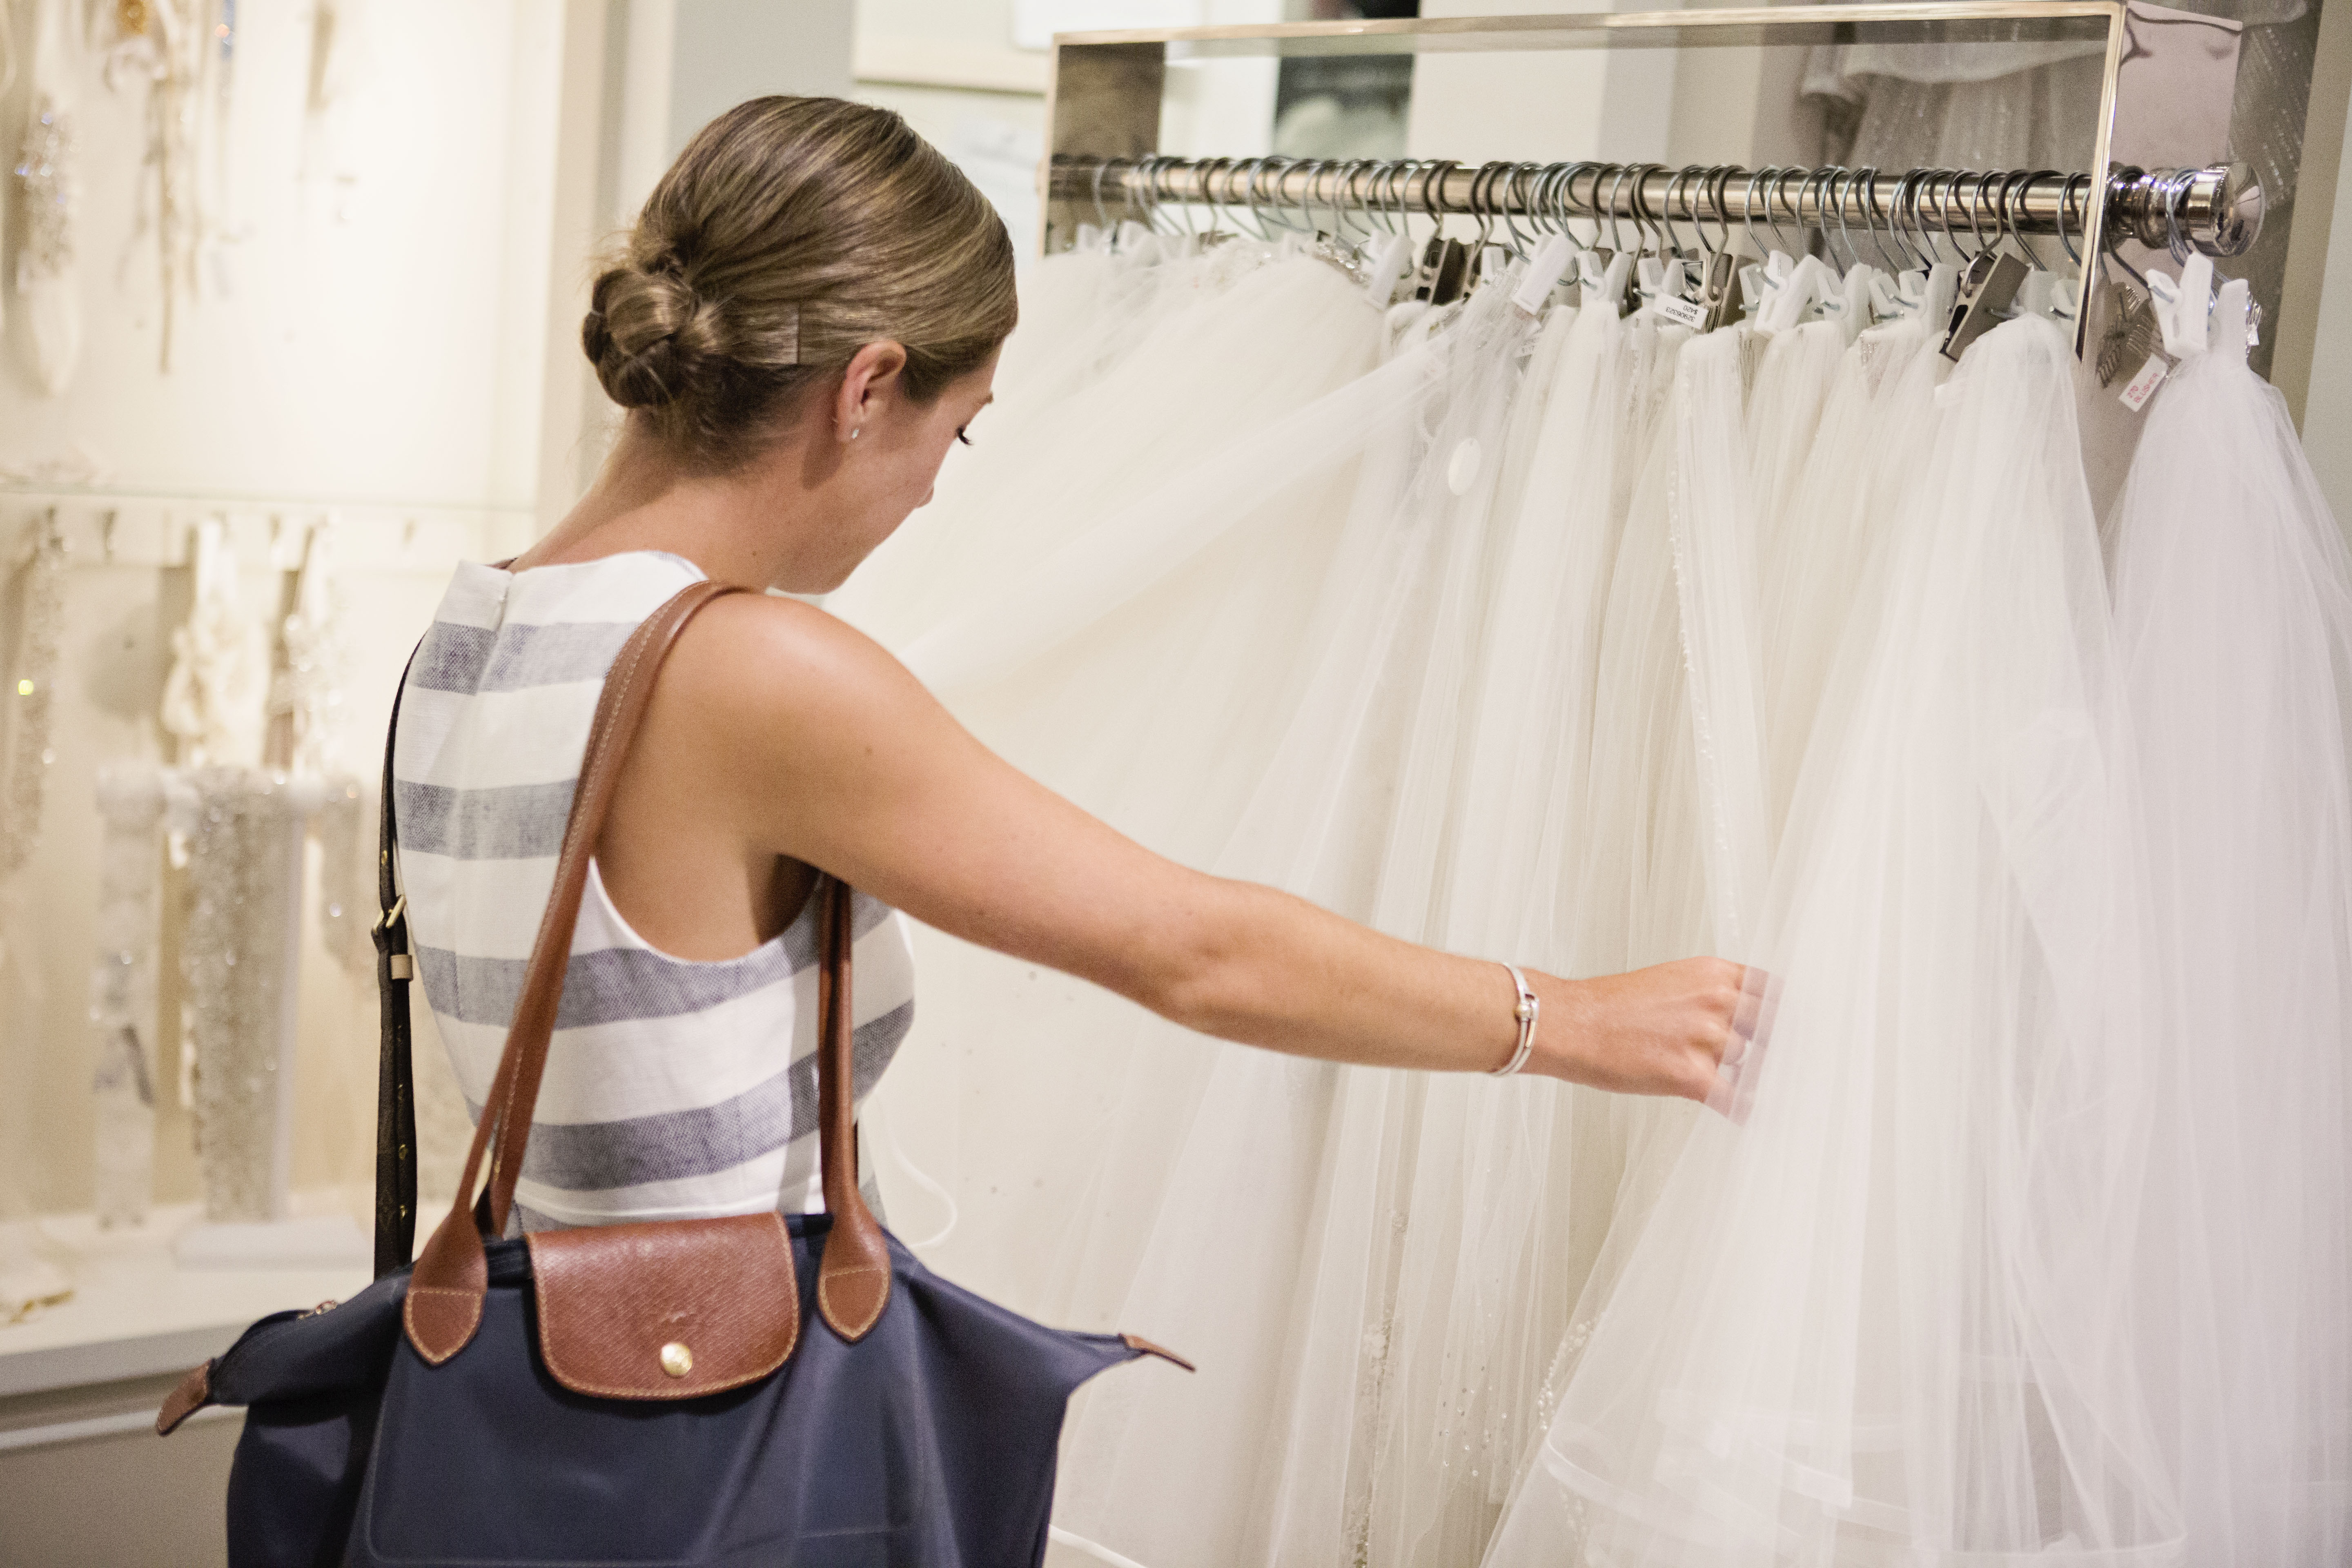 The Smart Girl’s Guide to Dress Shopping